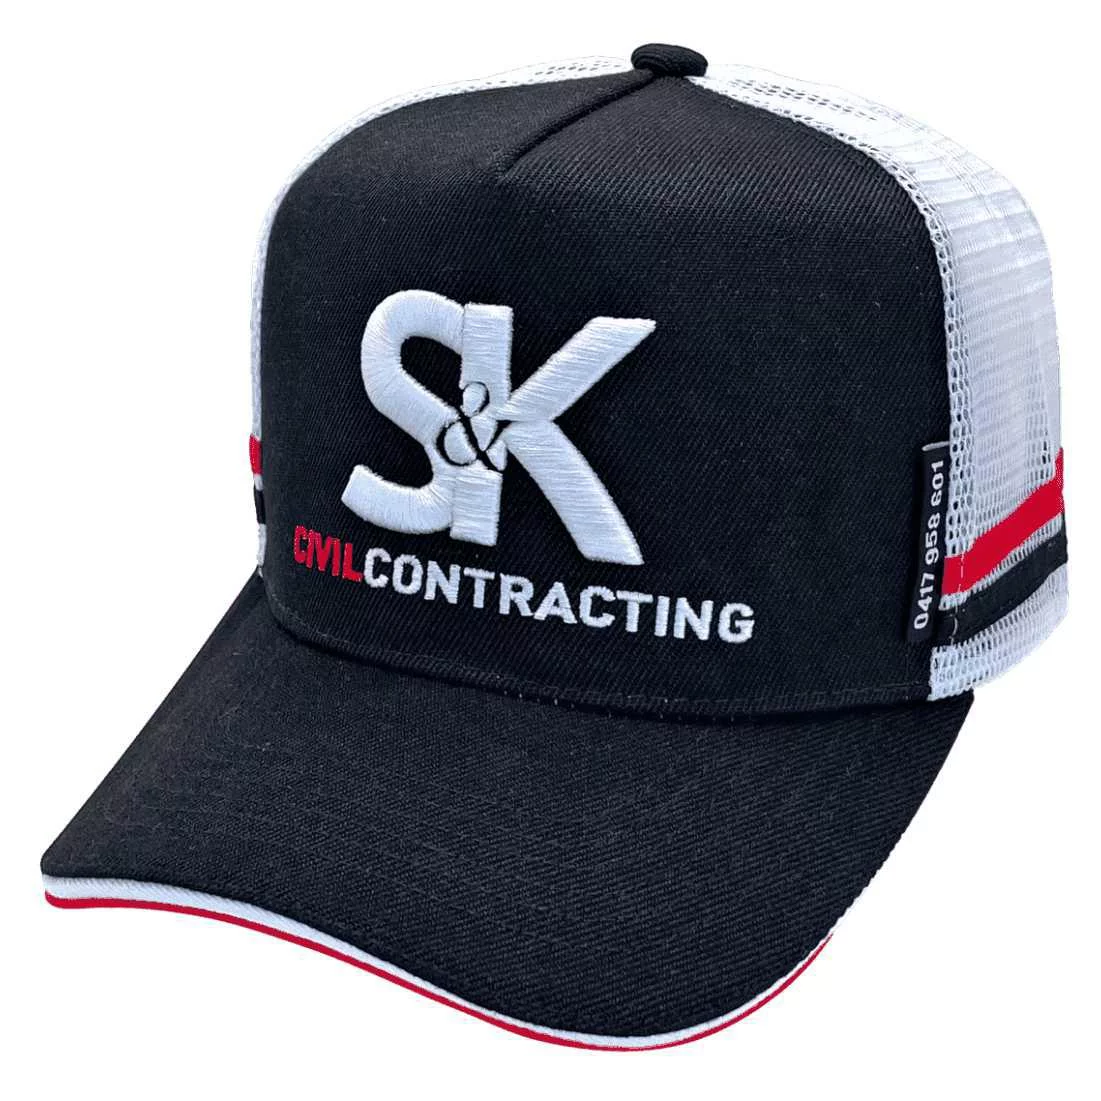 S and K Civil Contracting Atherton Qld HP Original Power Aussie Trucker Hat with Australian Head Fit Crown and Sandwich Brim with Double Sidebands